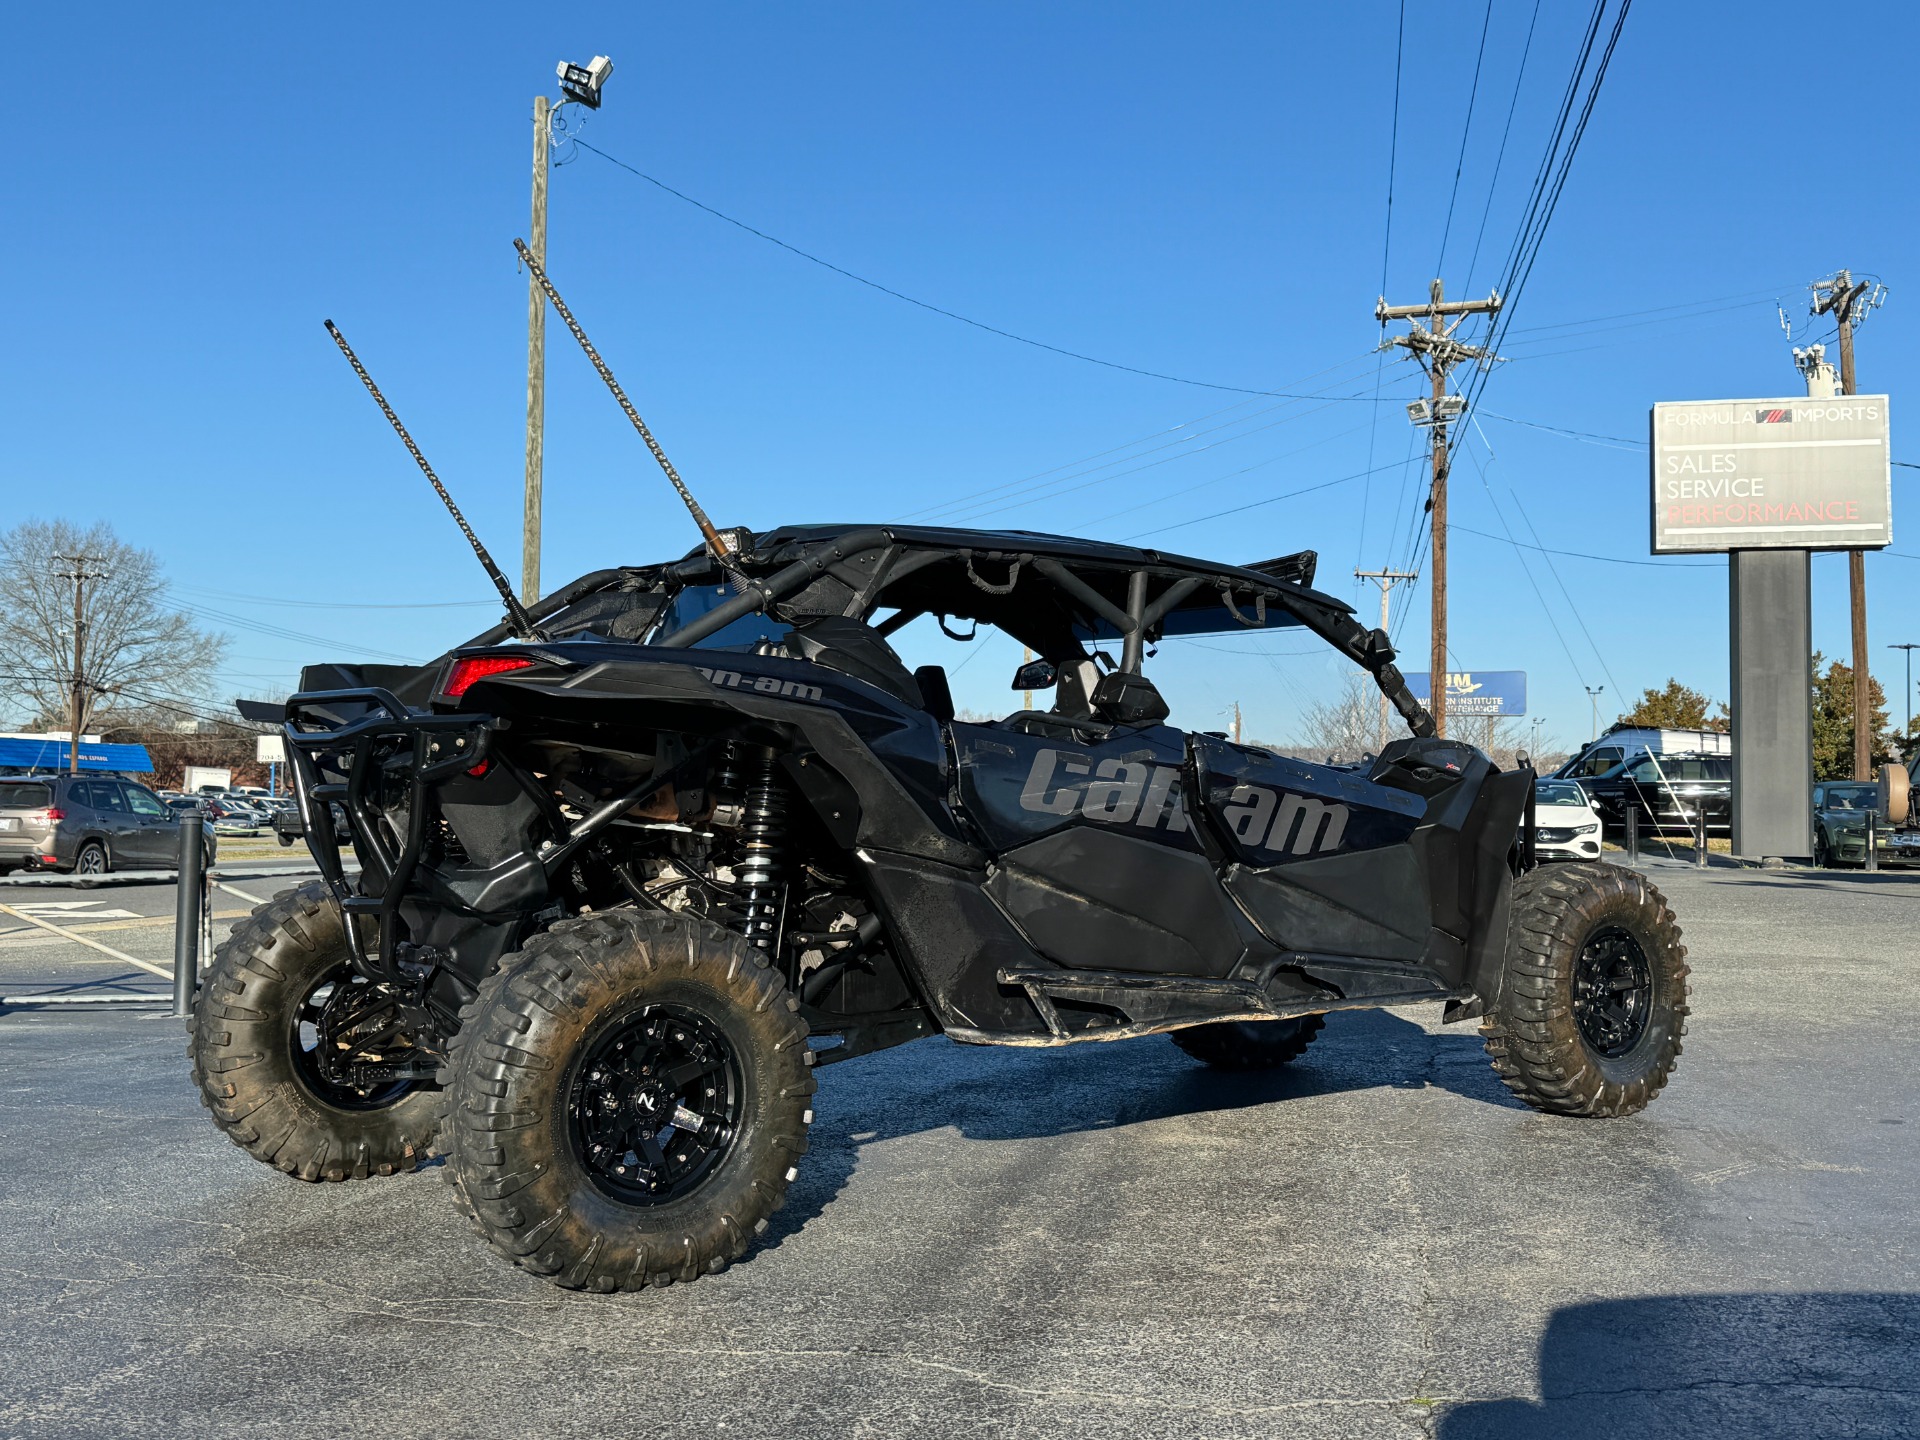 Used 2019 Can-Am Maverick Max XDS 1000 Turbo LIGHTBARS / SOUND SYSTEM / CB RADIO / WHEELS & TIRES for sale $29,500 at Formula Imports in Charlotte NC 28227 6